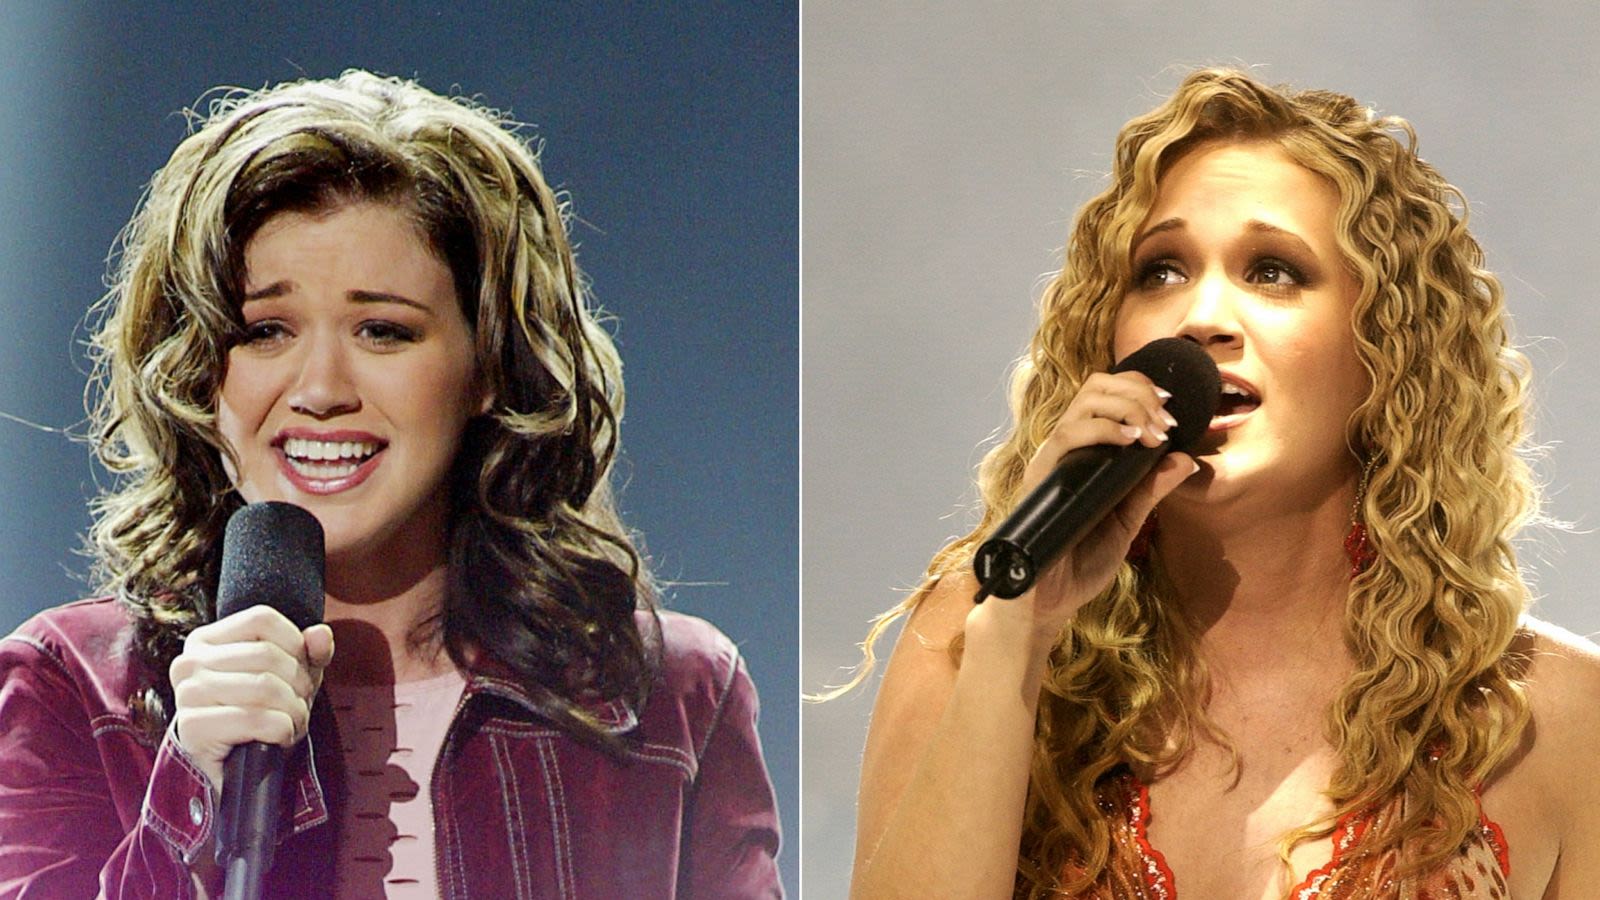 Who won 'American Idol'? Full list of former winners and runners-up